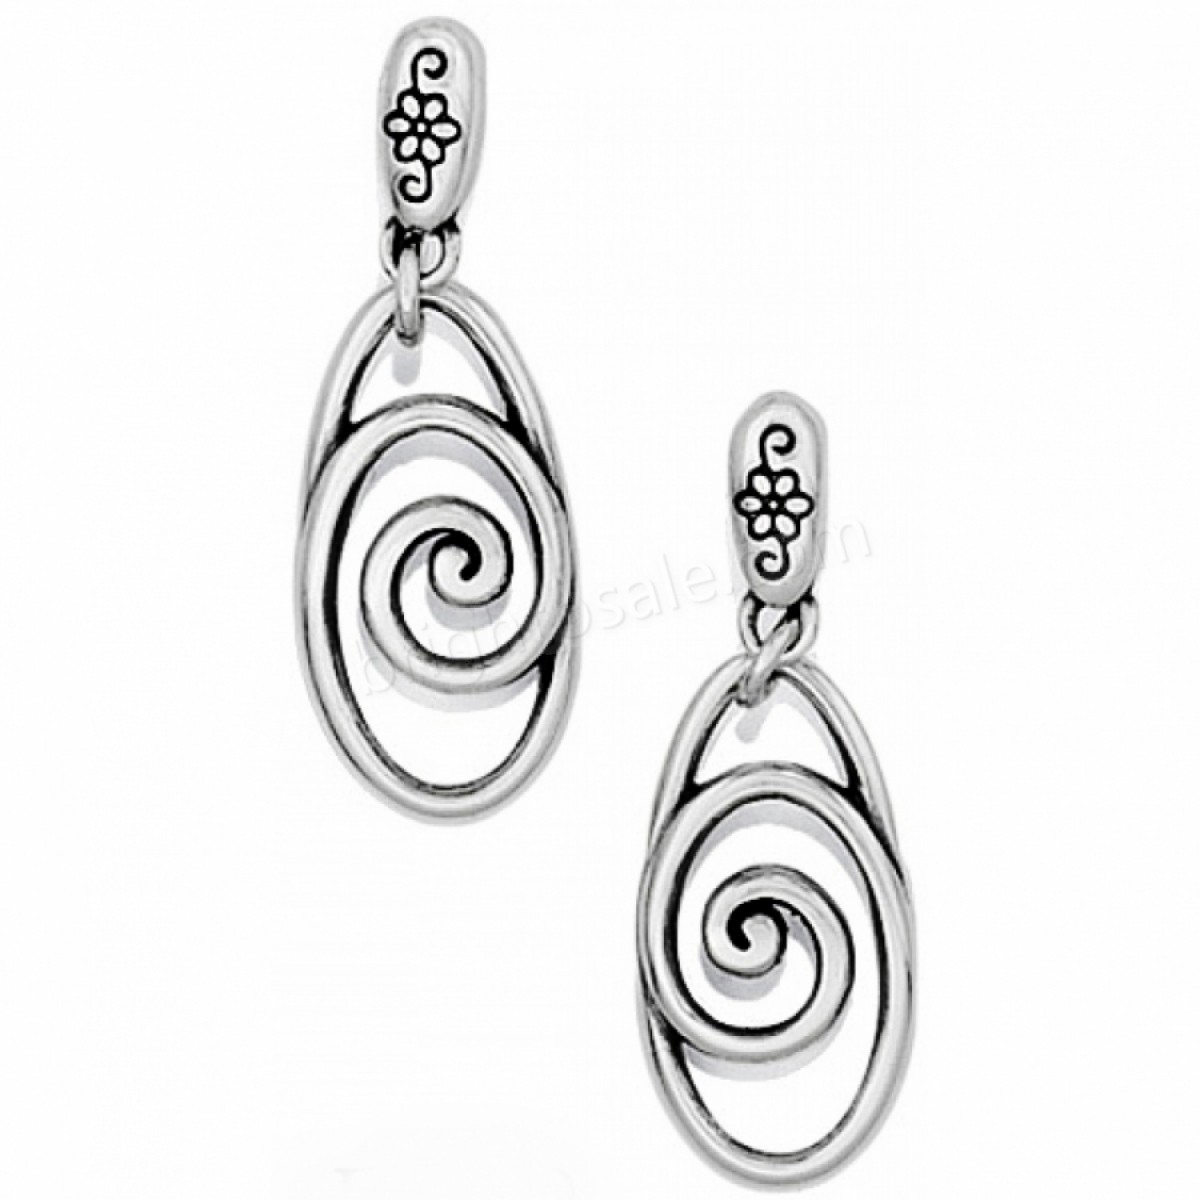 Brighton Collectibles & Online Discount Rock N Scroll Post Drop Earrings - -0